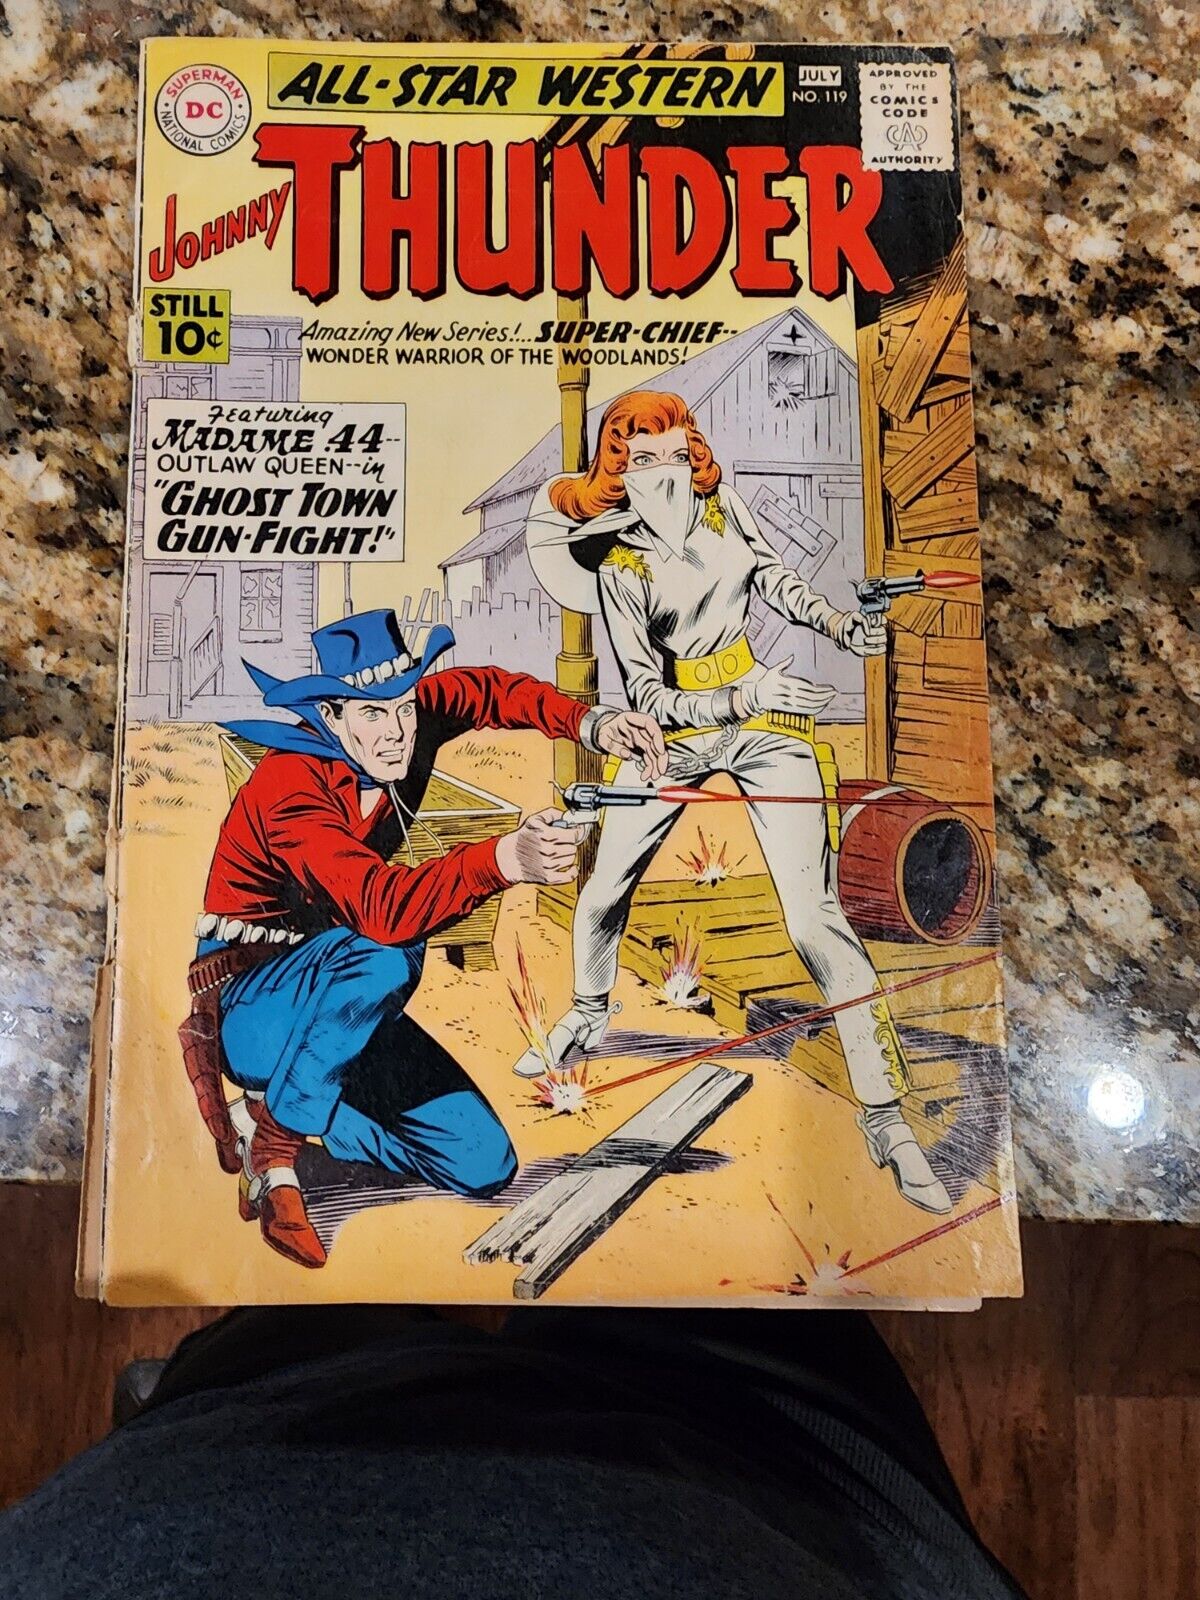 All Star Western #119 Johnny Thunder Final Issue 1961